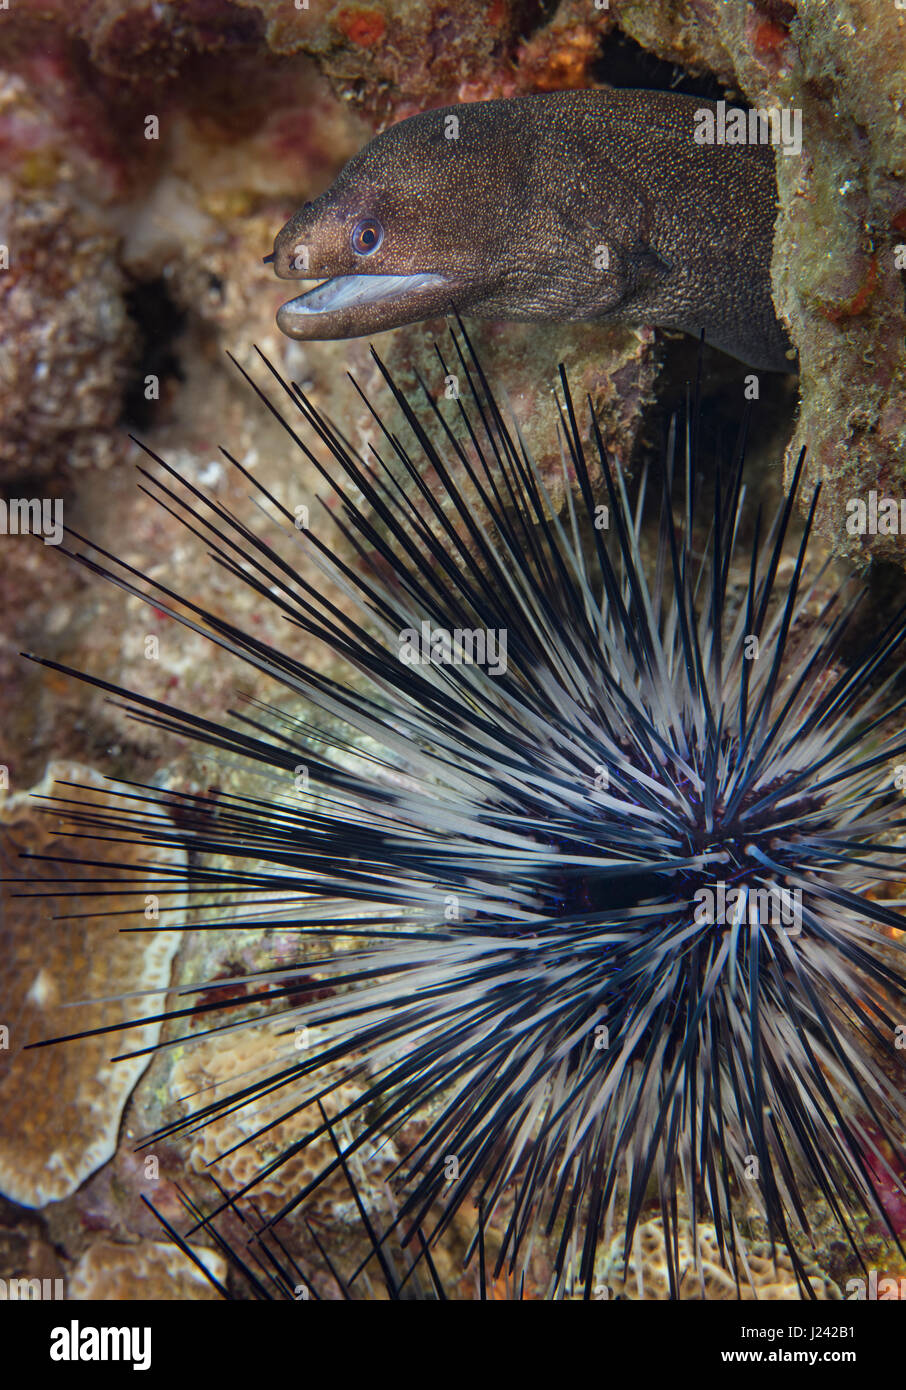 Goldentail moray eel hides behind the protection of a long-spined urchin. Stock Photo